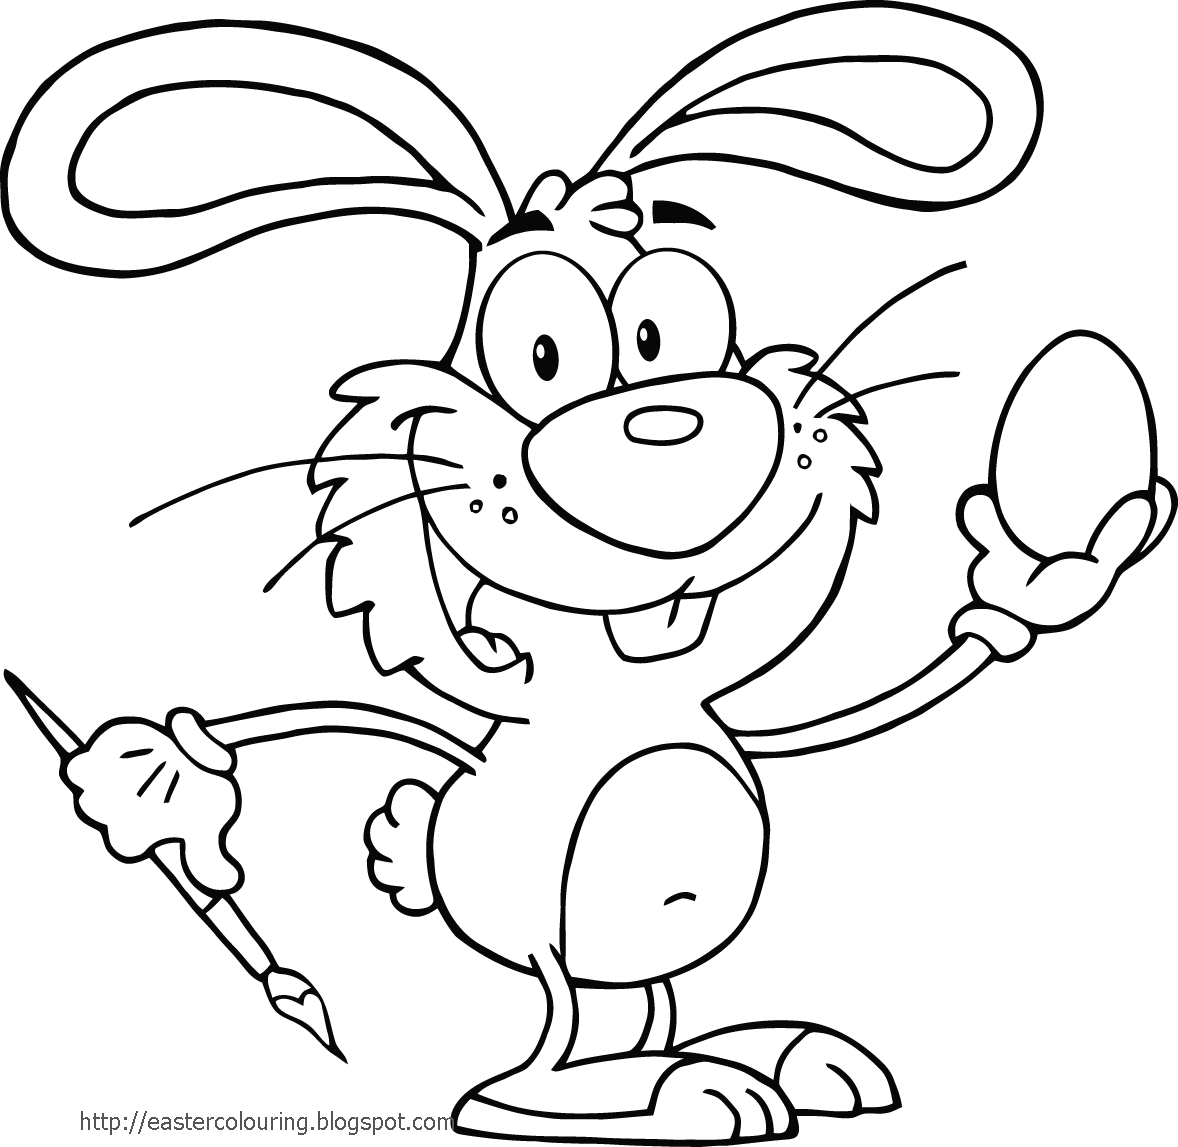 Easter Bunny Coloring Pictures 10